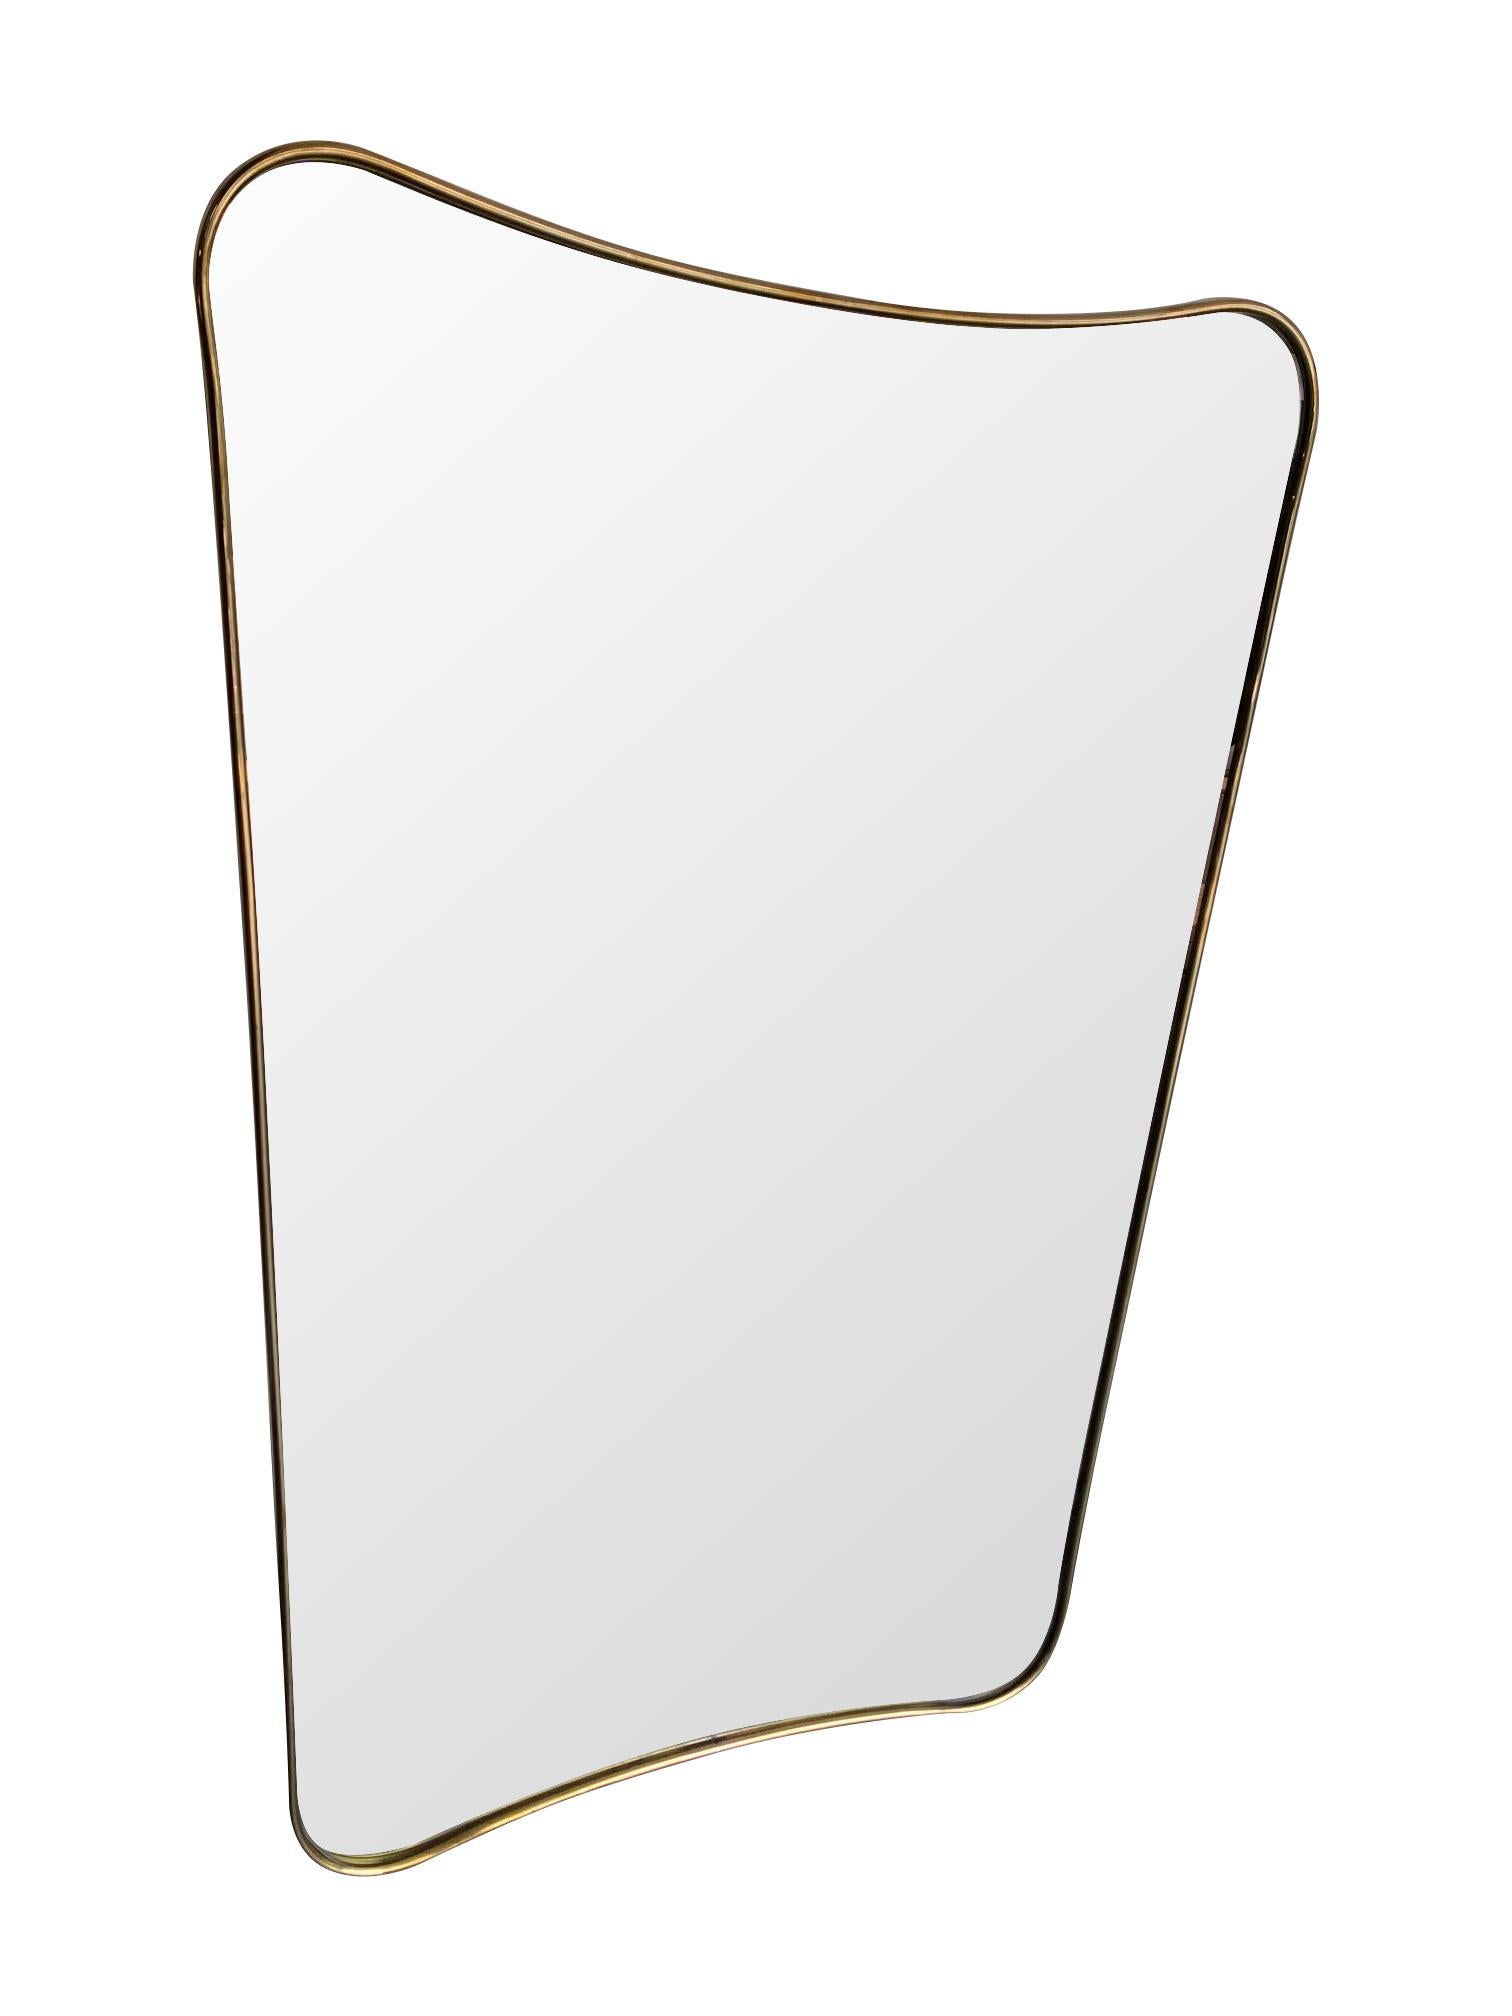 Contemporary Italian Shield Mirror with Brass Surround in the Style of Gio Ponti